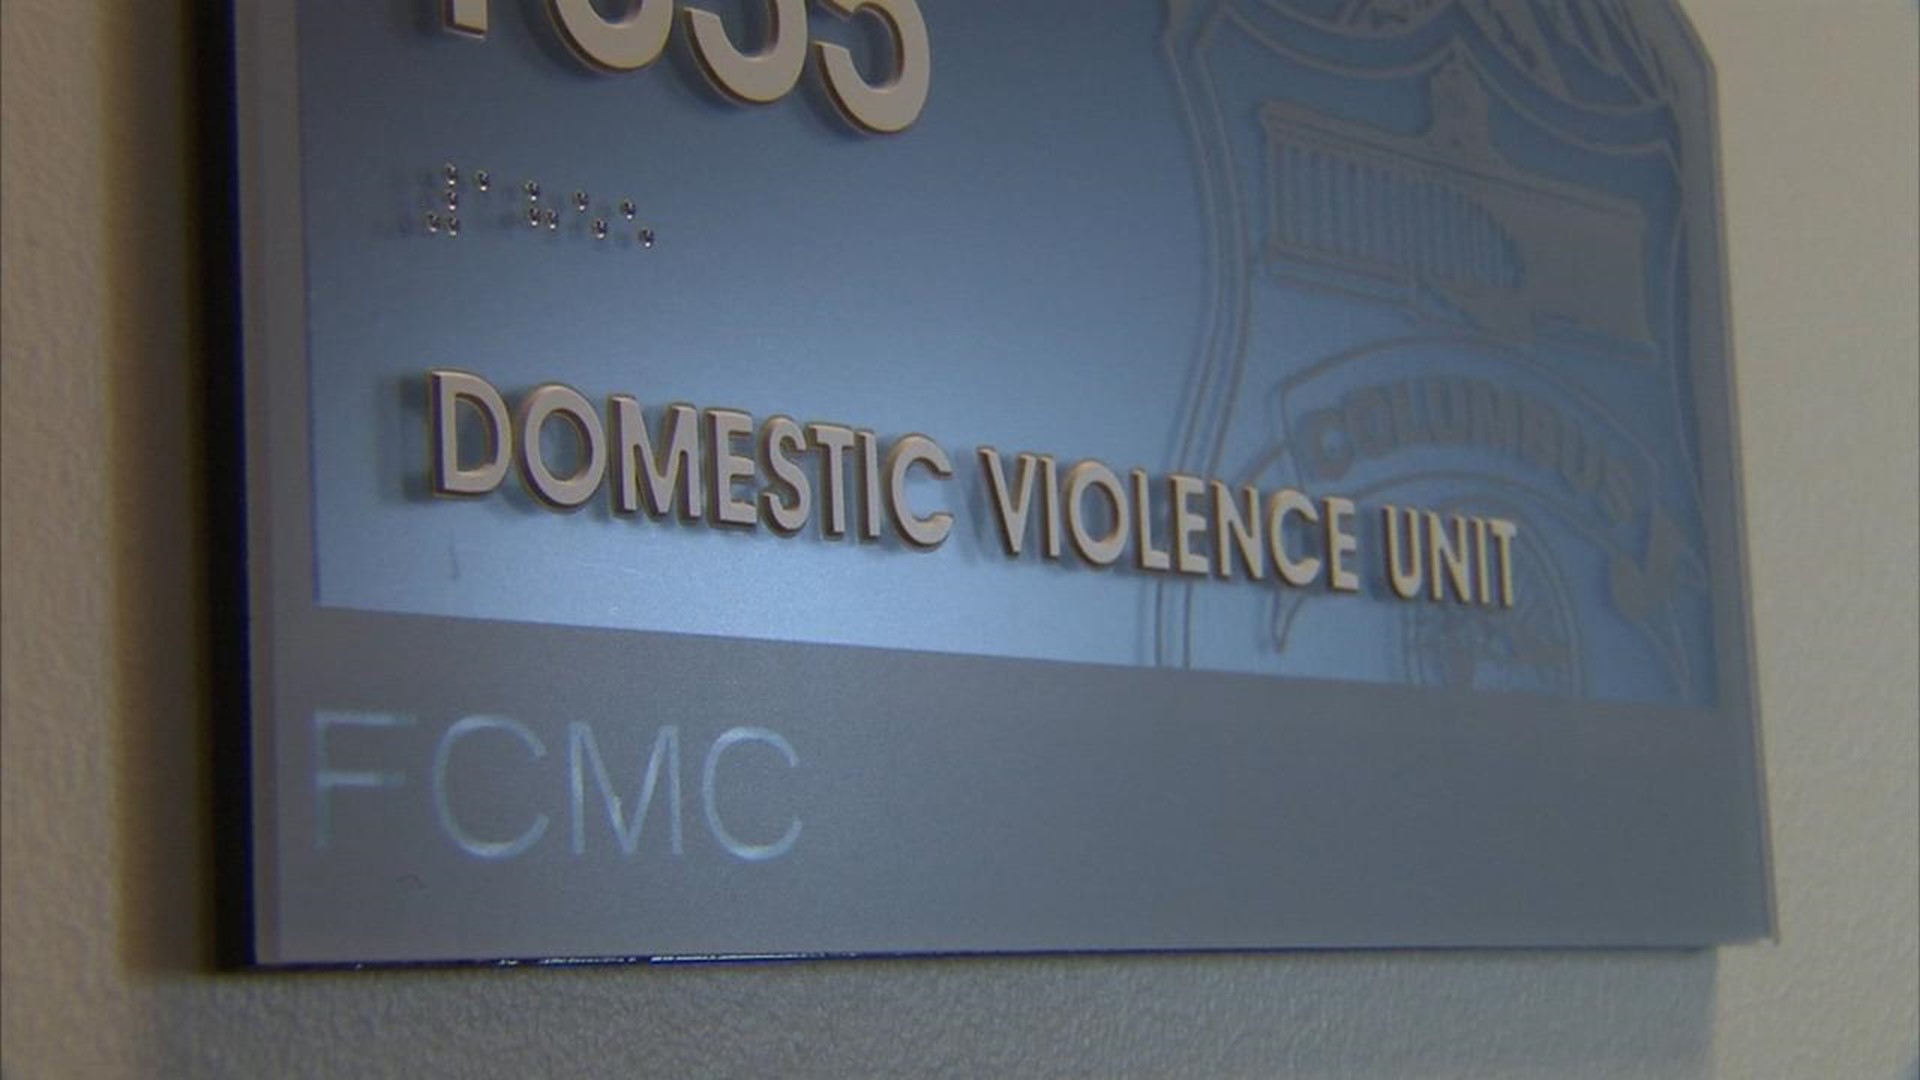 New Columbus Police Unit Works To Protect Victims Of Domestic Violence